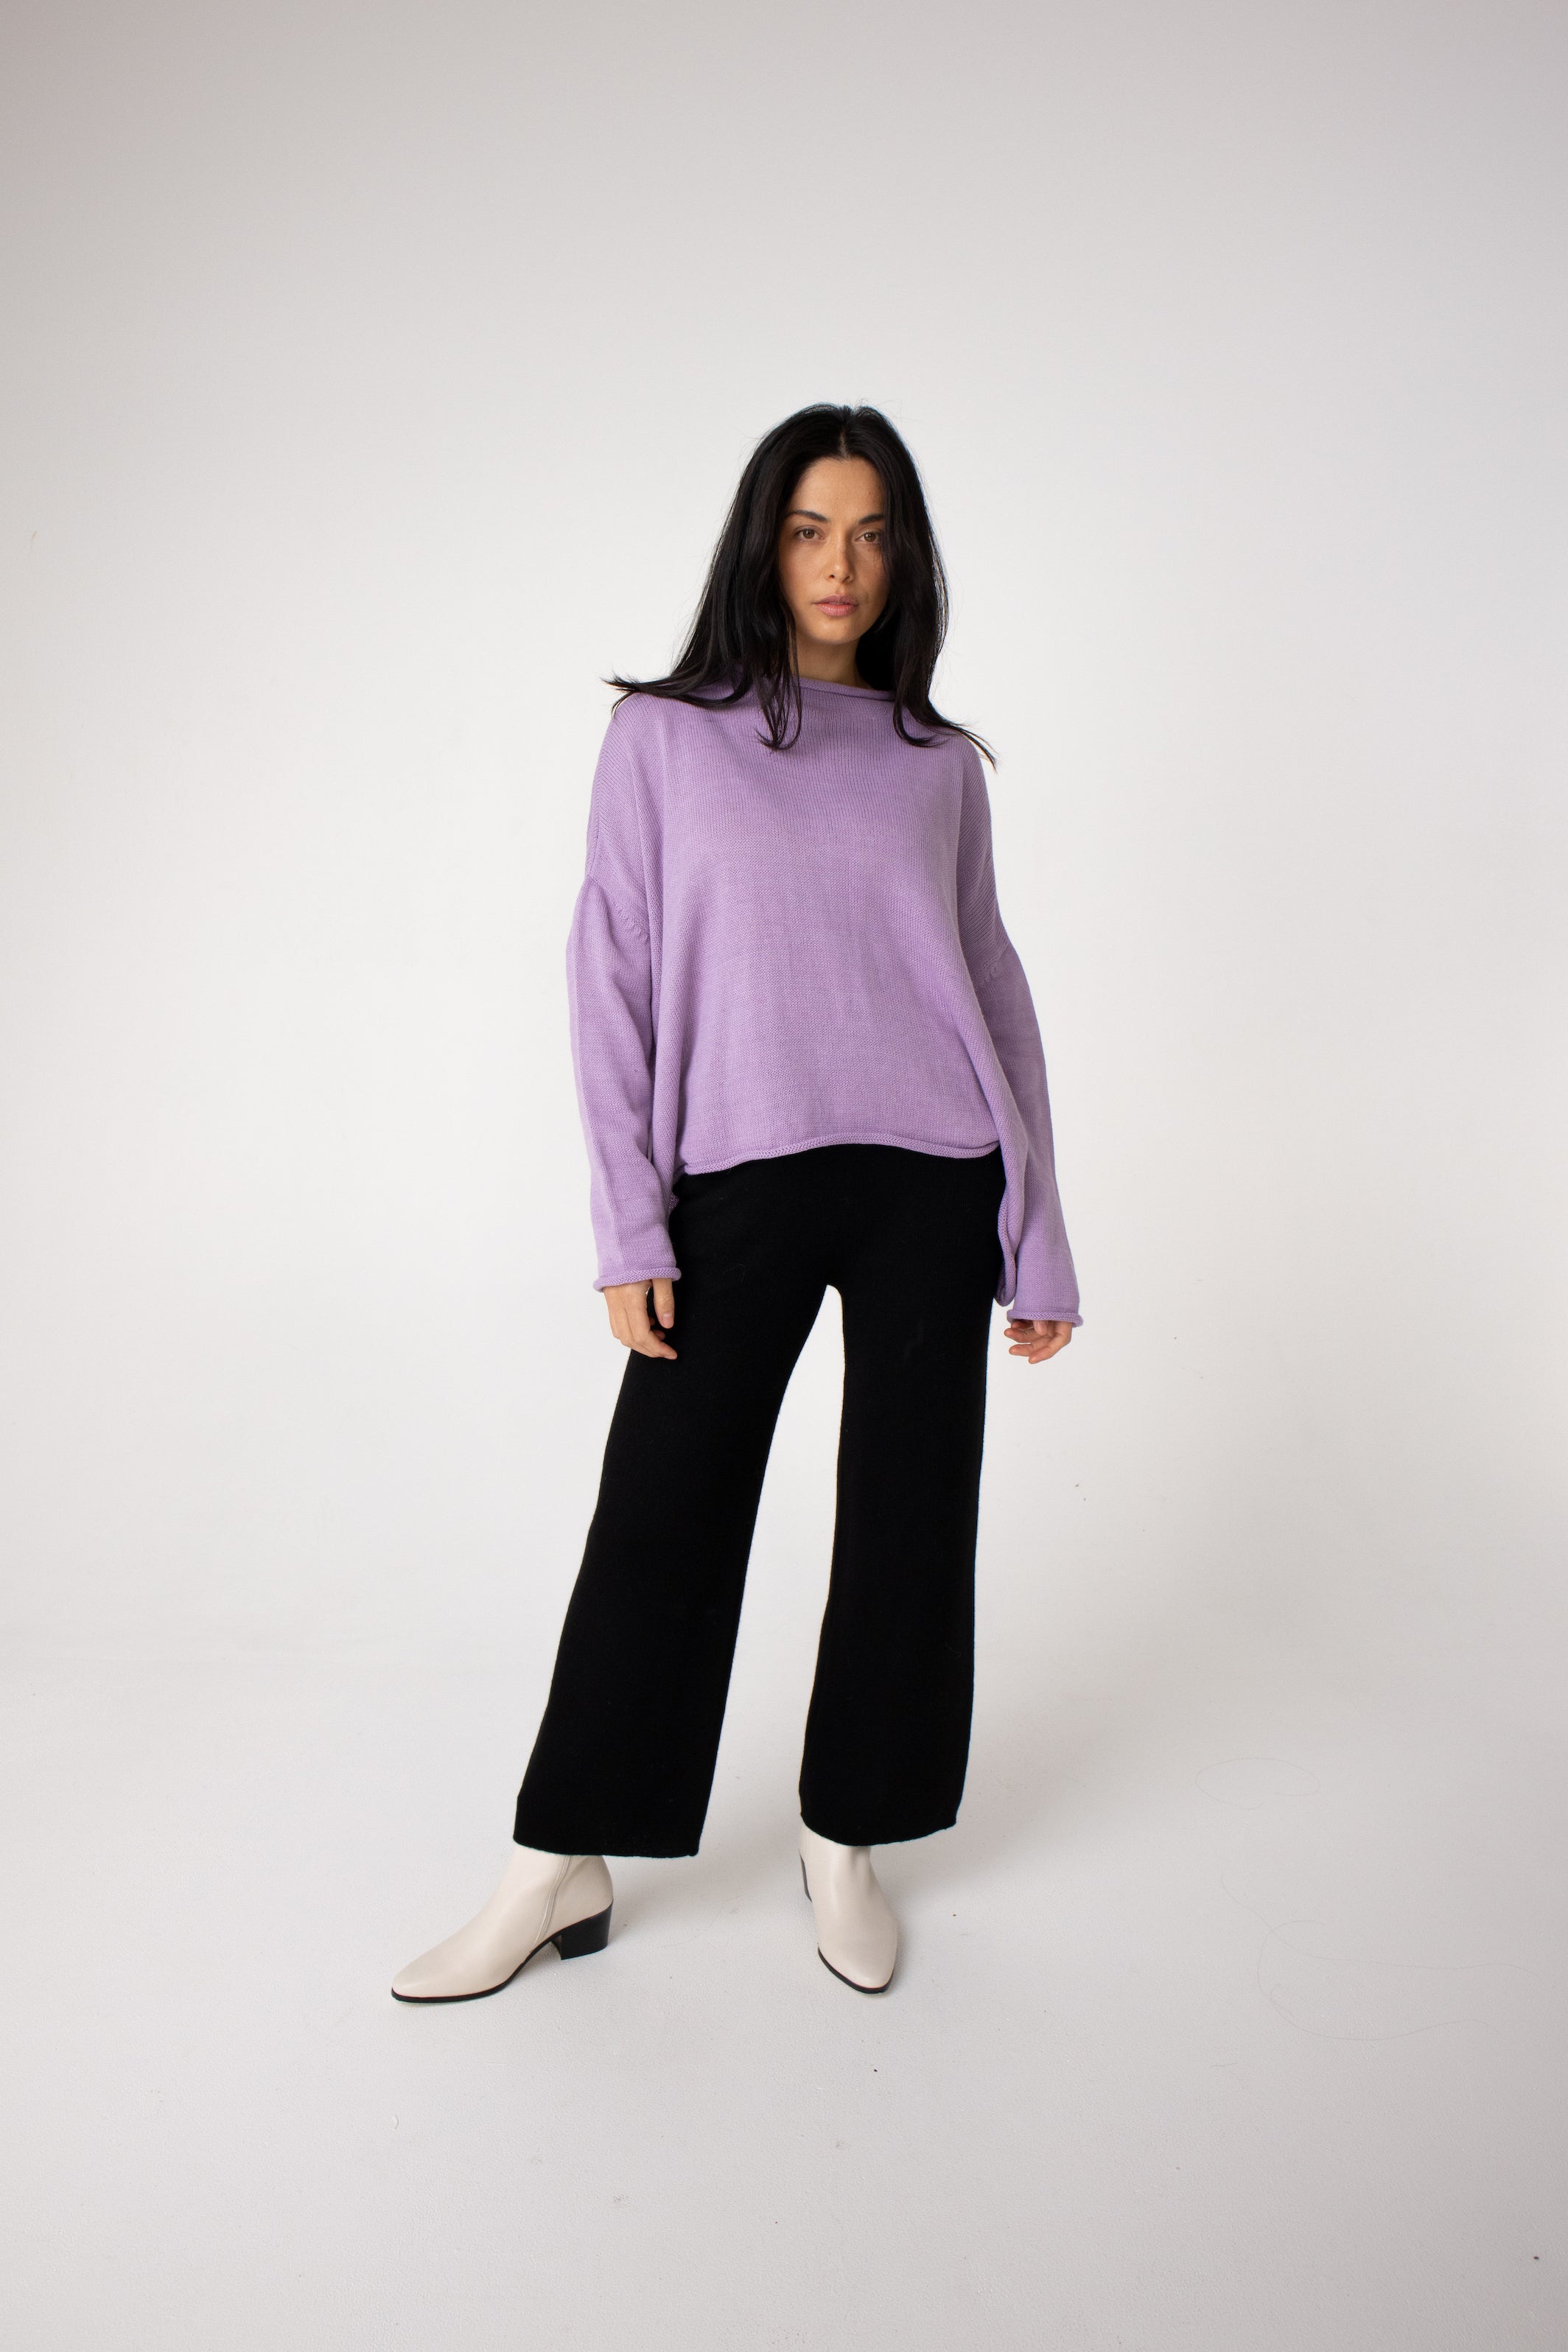 ethically made knit pants for women #colour_black